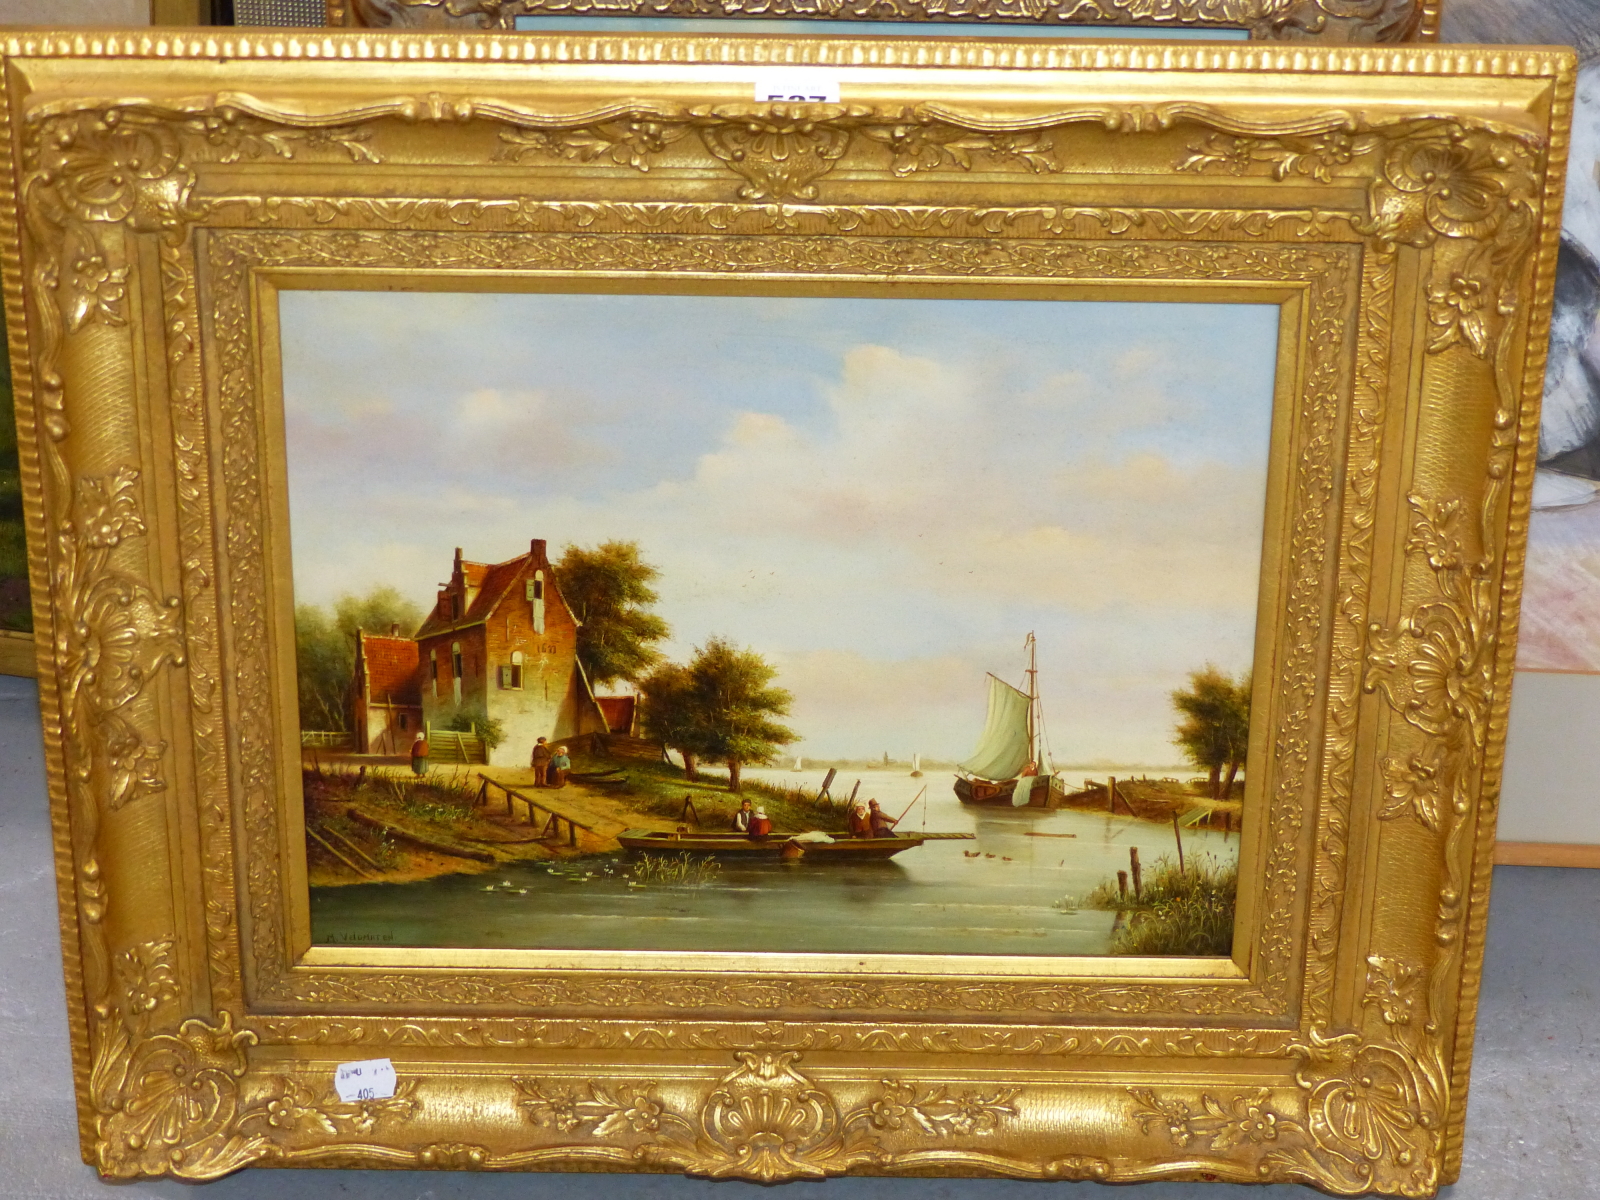 MARTINUS VELDMATEN (20TH CENTURY) DUTCH, RIVER SCENE WITH BOATS AND FIGURES, OIL ON PANEL, 39 x 28. - Image 2 of 6